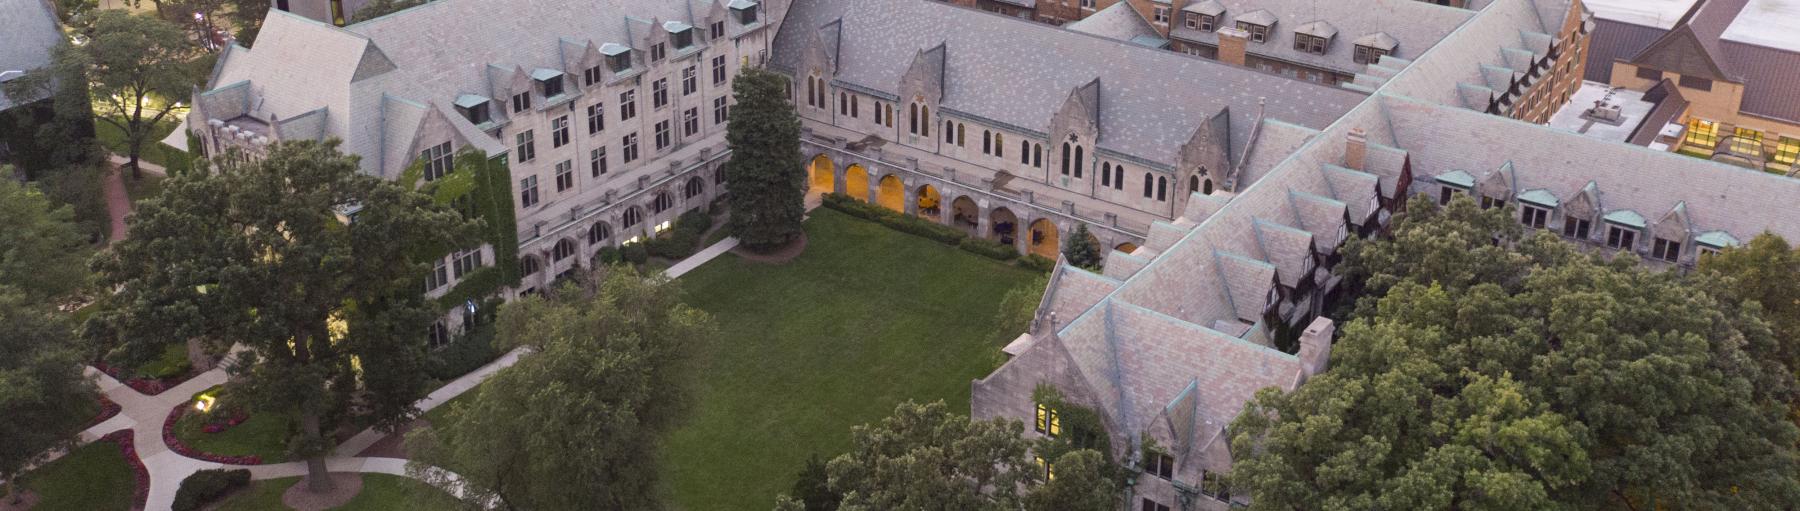 Directions and Campus Map | Dominican University